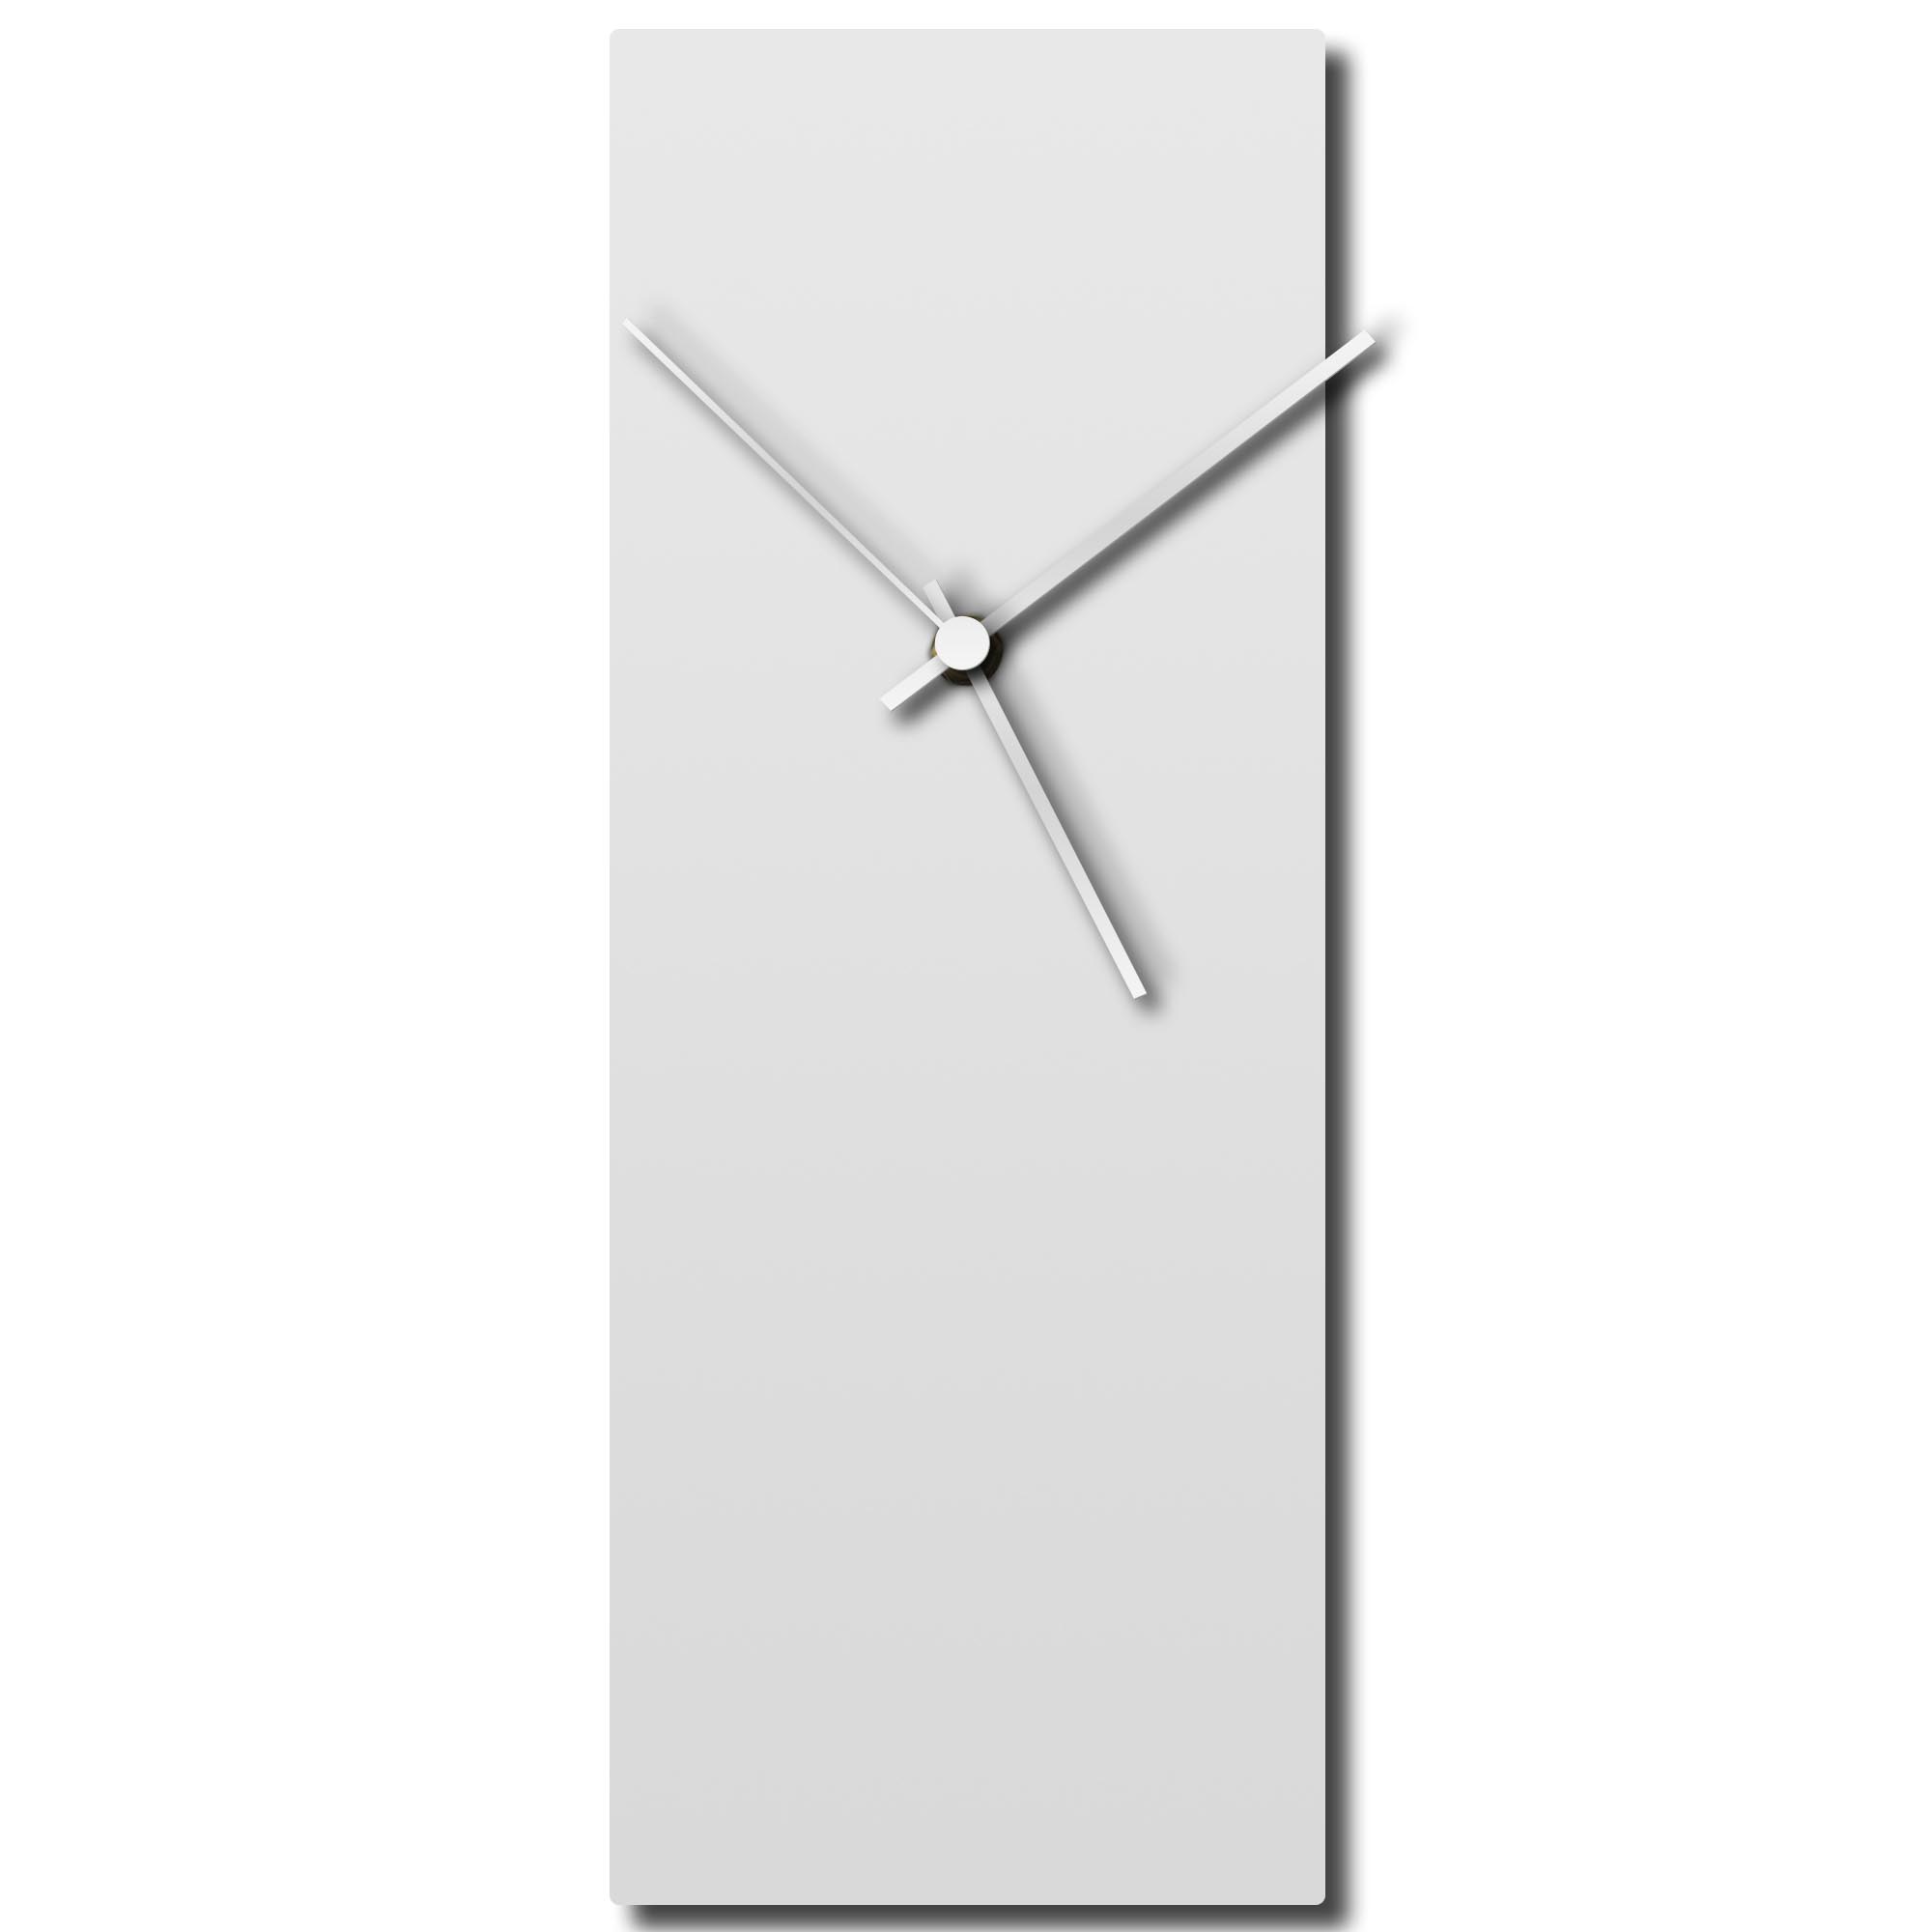 Whiteout White Clock 6x16in. Aluminum Polymetal